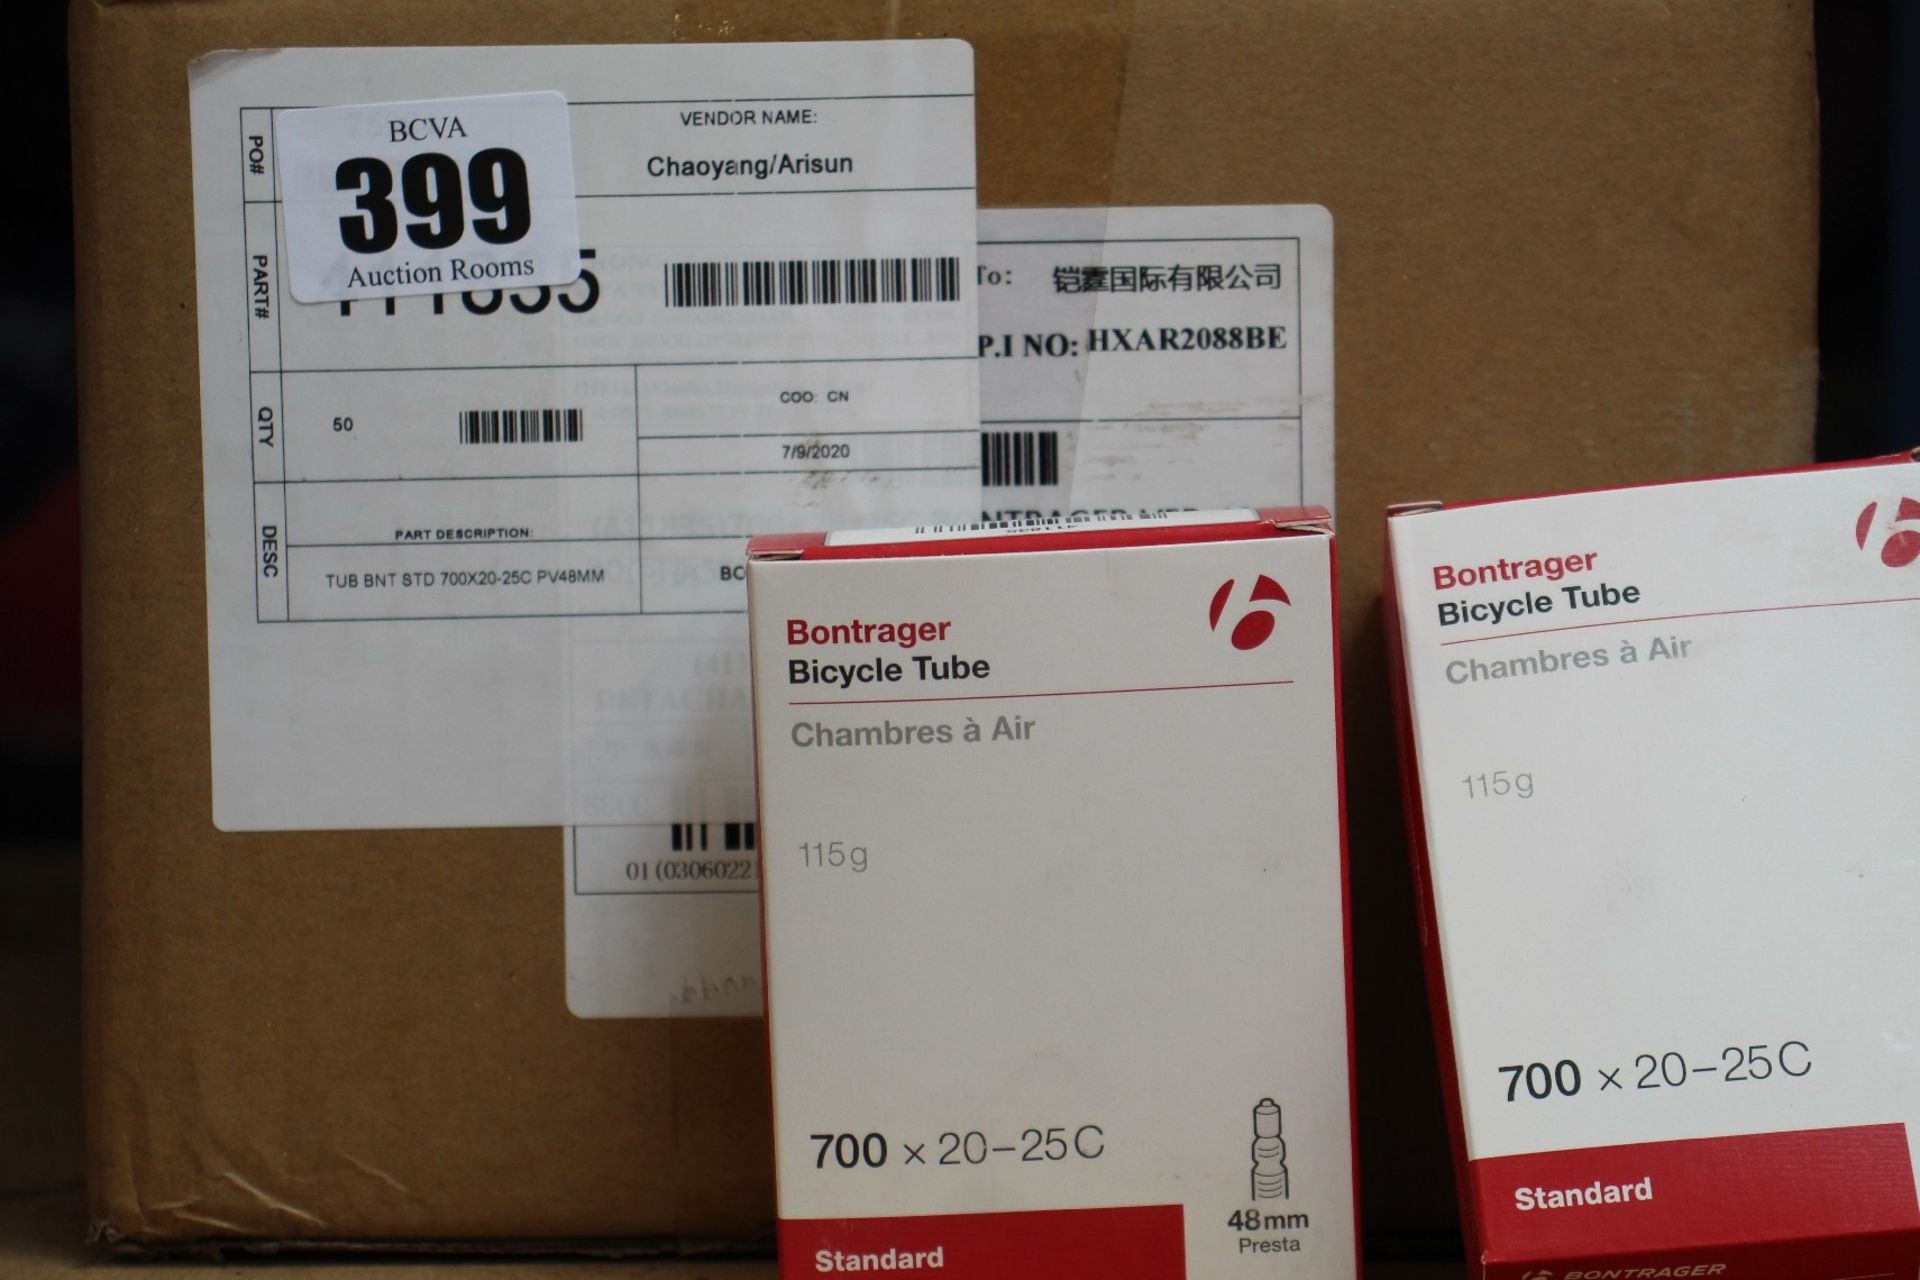 Fifty boxed as new Bontrager 700 x 20-25C standard bicycle tubes.